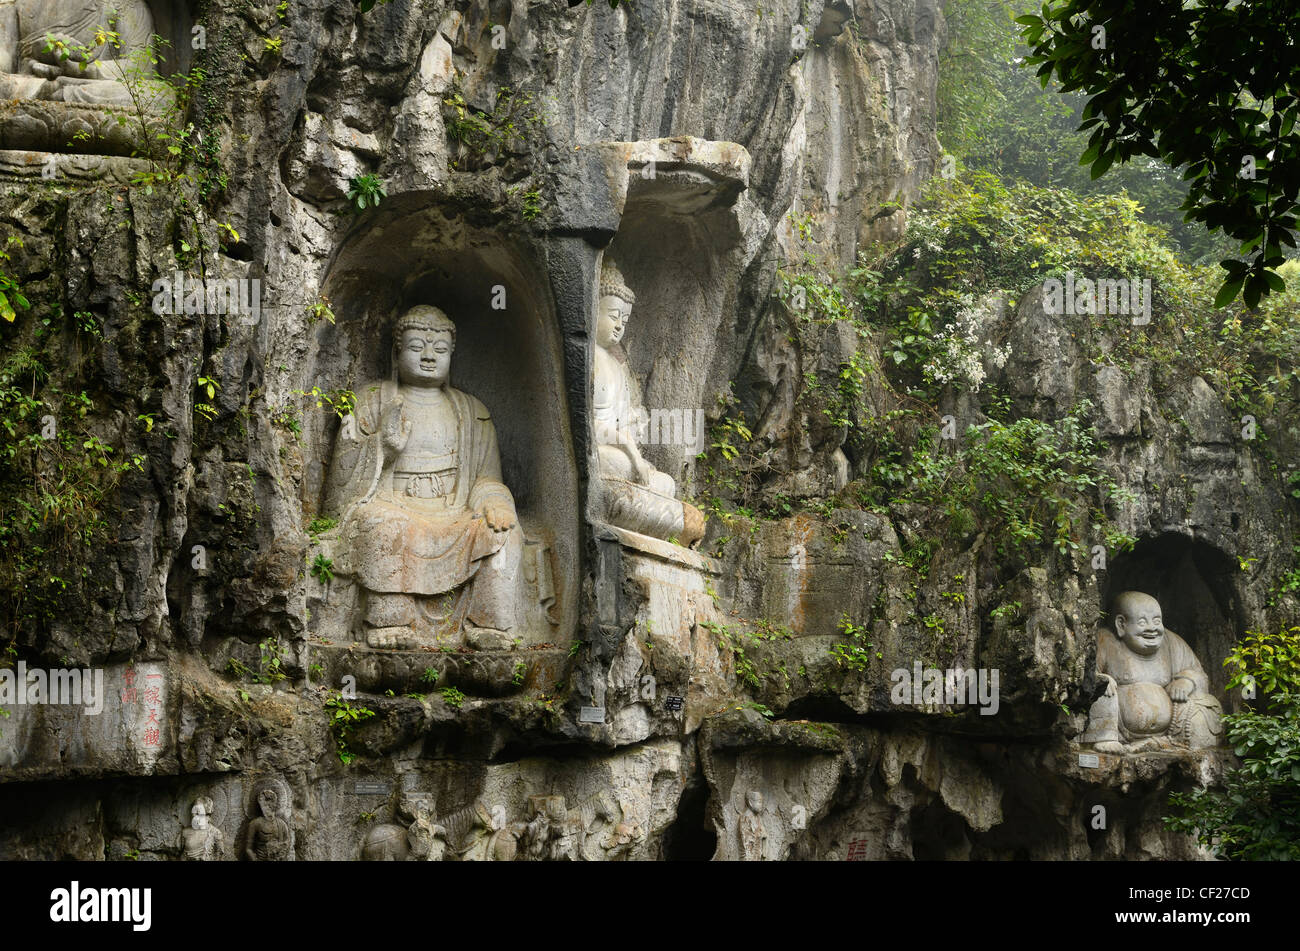 Limestone cliff at Feilai Feng with Buddhist sculptures at Ling Yin temple Hangzhou China Stock Photo